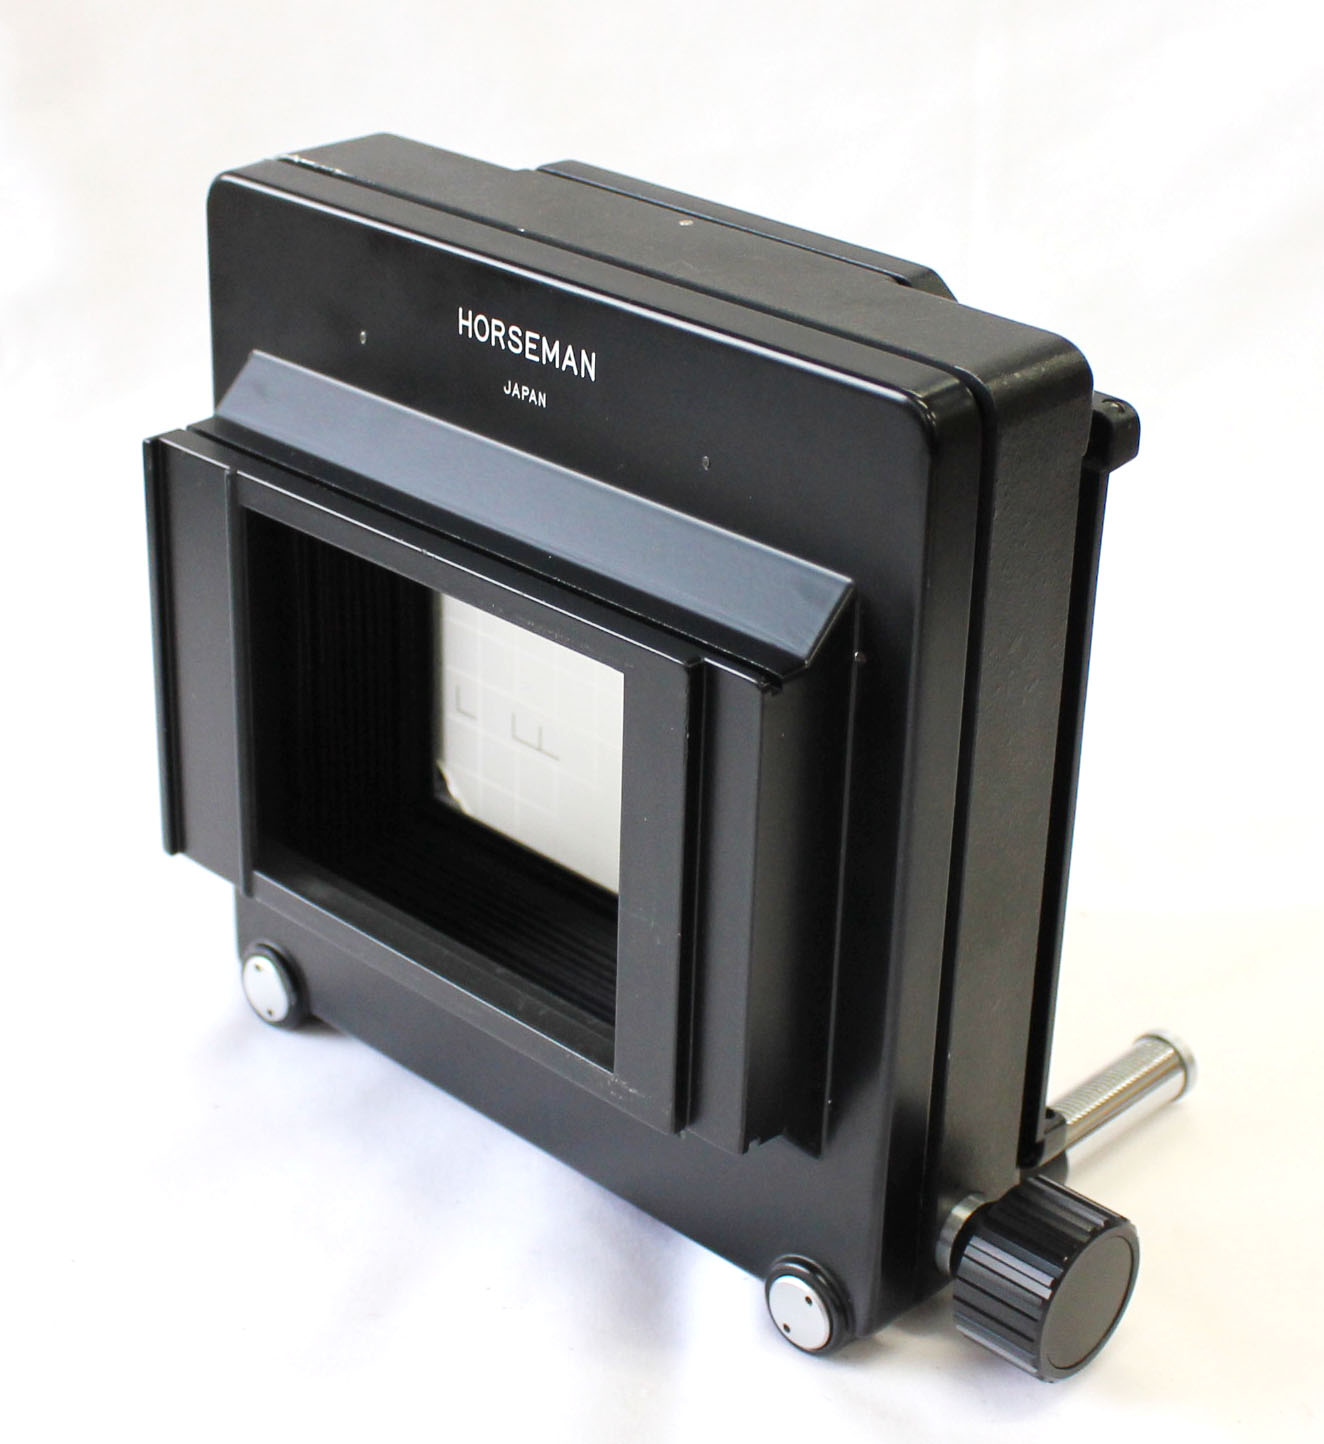 Japan Used Camera Shop | Horseman 4x5 Universal Adapter 6x9 6x7 to 4x5 for Horseman VH VH-R from Japan